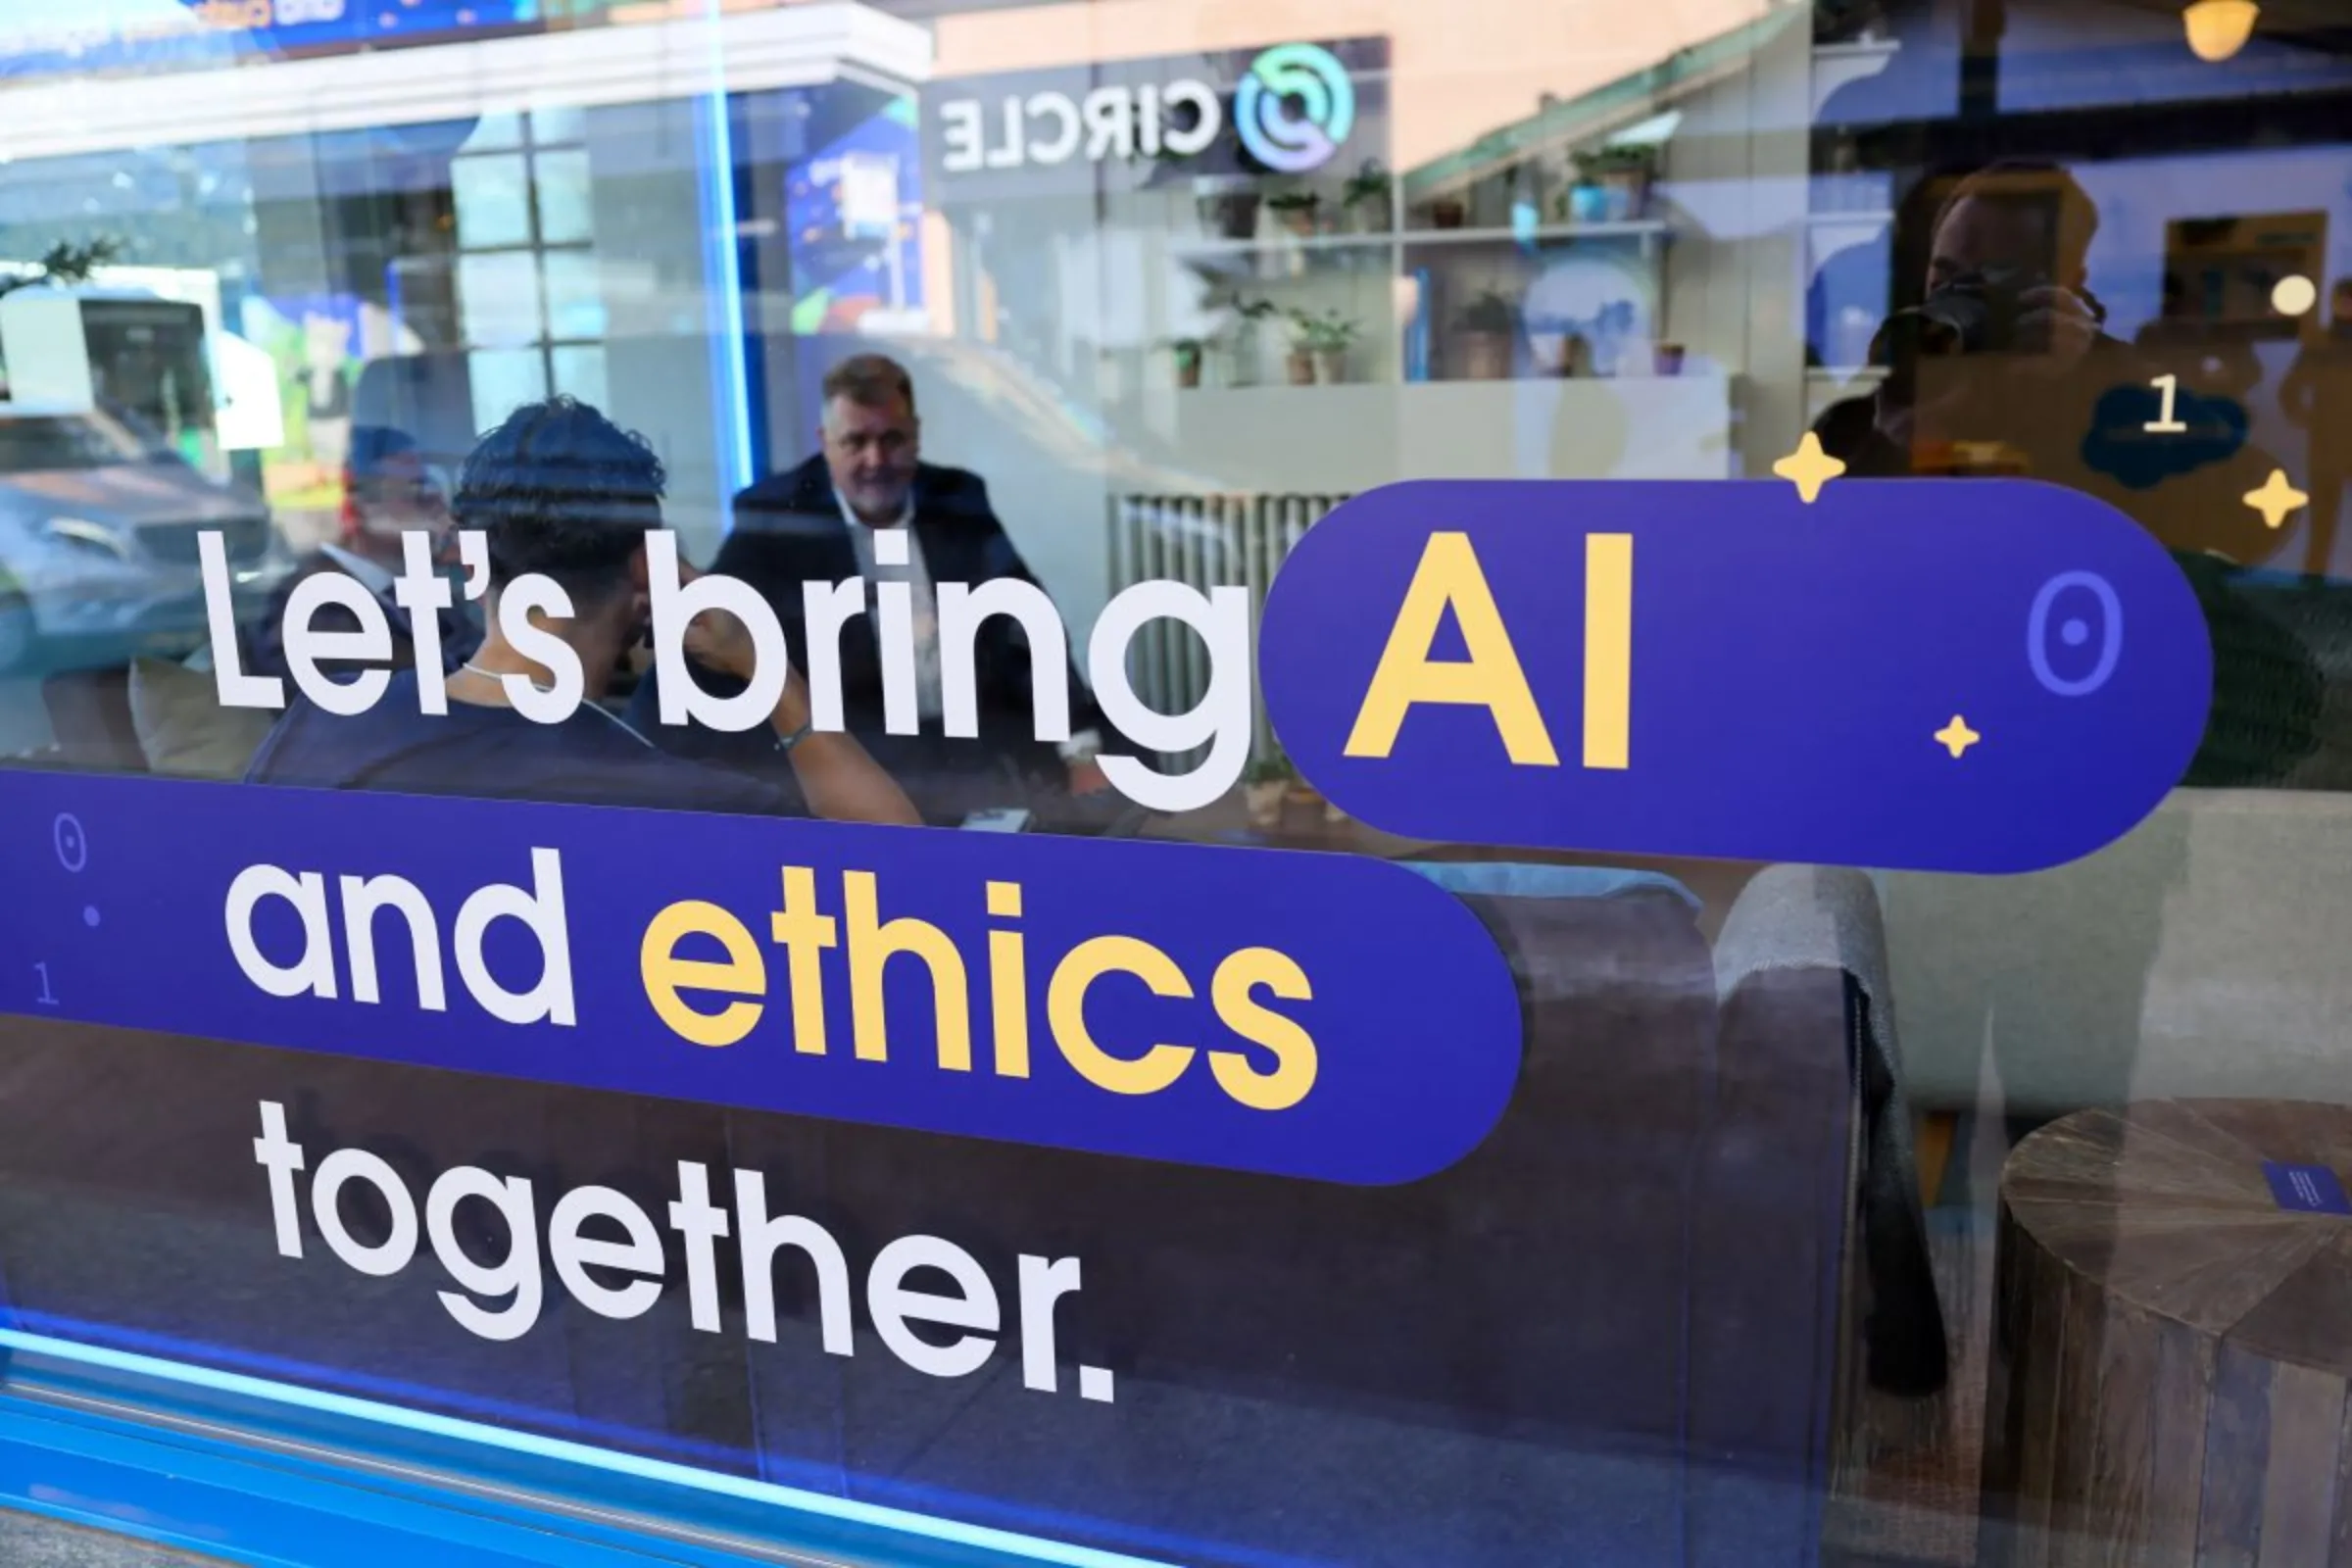 Salesforce's slogan related to Artificial Intelligence (AI) is displayed on a window during the 54th annual meeting of the World Economic Forum in Davos, Switzerland, January 16, 2024. REUTERS/Denis Balibouse